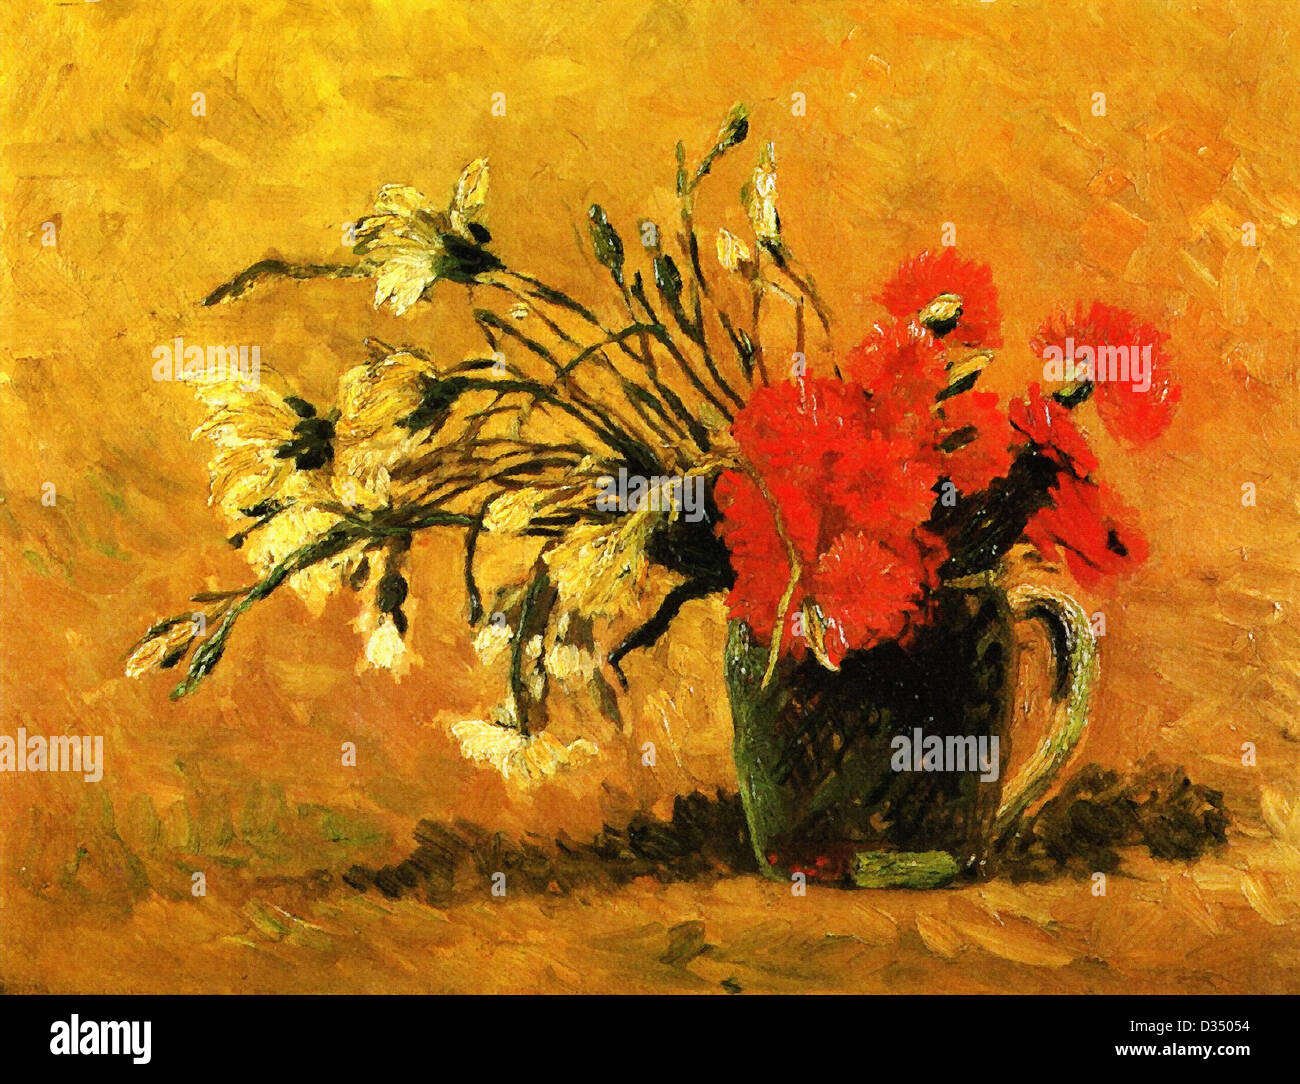 Vincent van Gogh, Vase with Red and White Carnations on a Yellow Background/ 1886. Post-Impressionism. Oil on canvas. Stock Photo